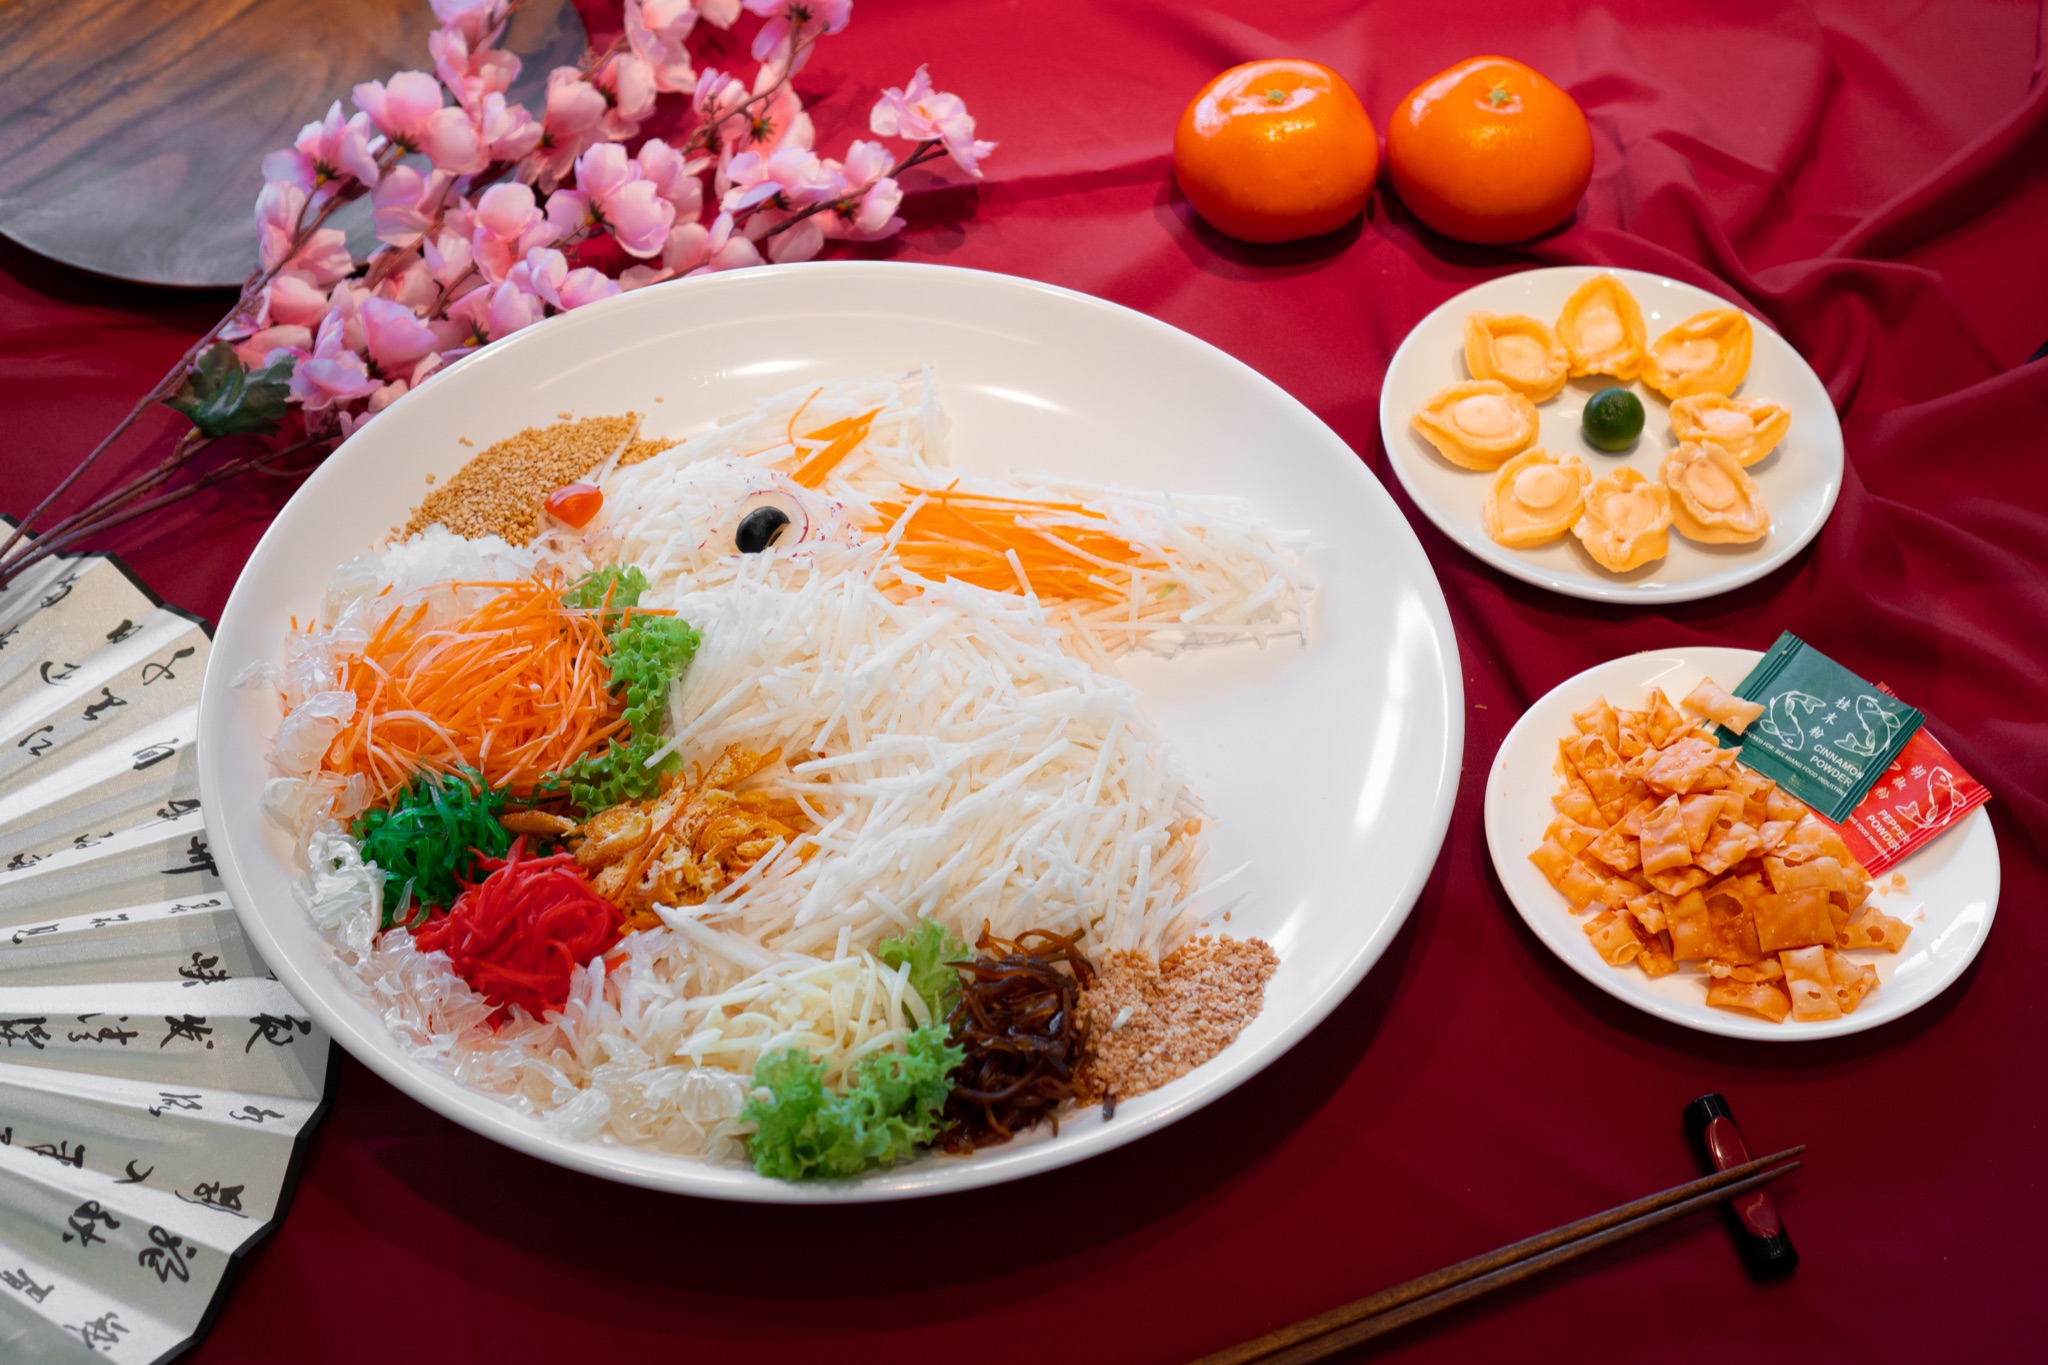 Lobang: MORE THAN 50 CNY 2023 F&B Deals - Your one stop guide to Yusheng, Pen Cai, Set Menus and more this Lunar New Year! - 83